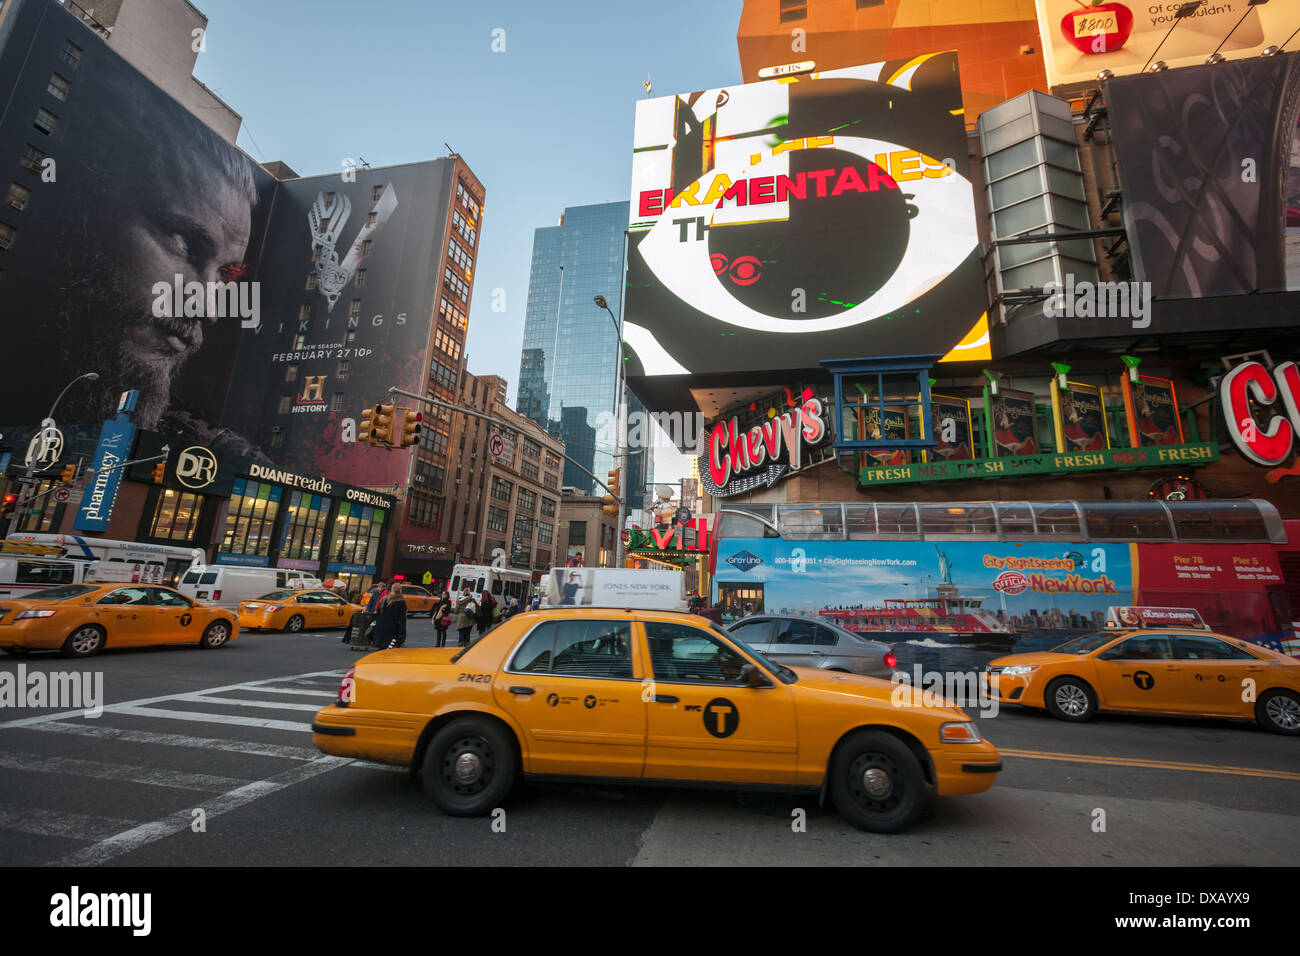 An electronic billboard in Times Square in New York, owned by CBS Outdoor America, shows advertising for CBS television programs Stock Photo